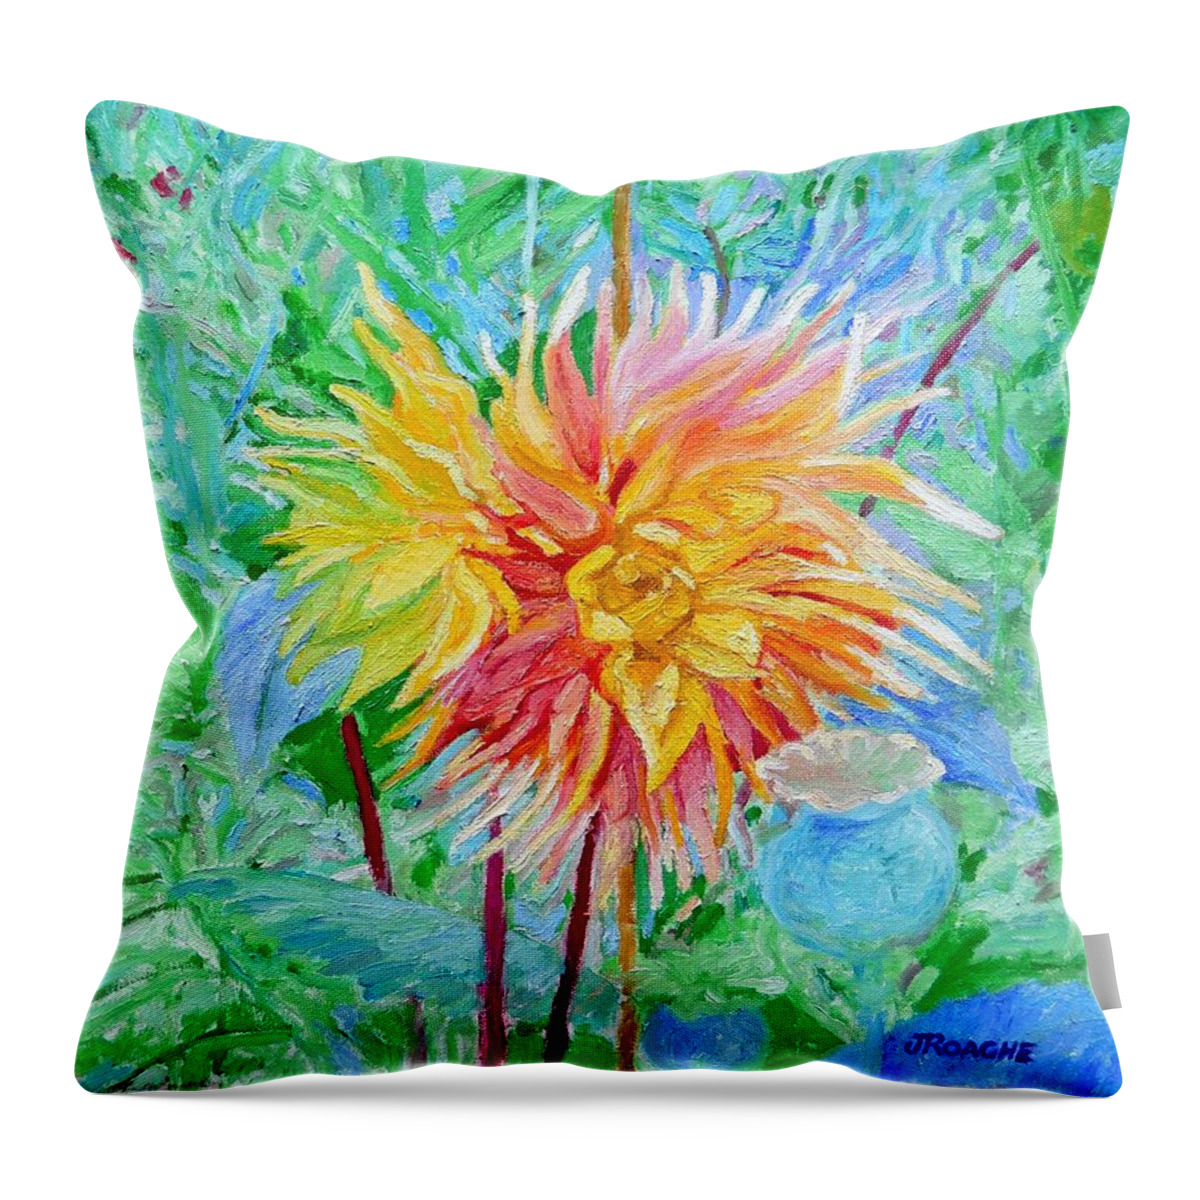 Flower Throw Pillow featuring the painting Poppy by Joe Roache